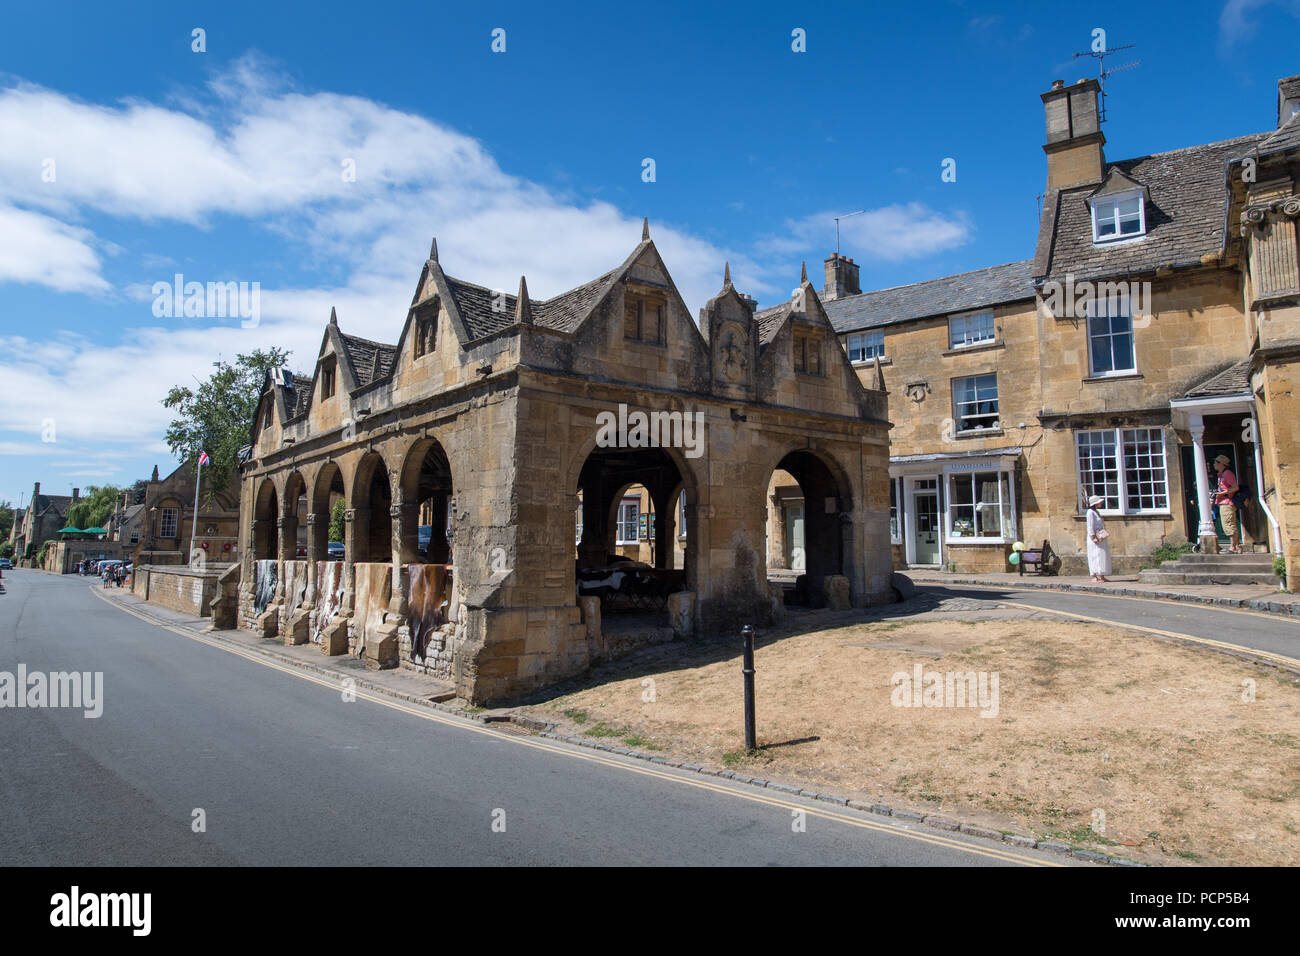 Chipping Campden High street during summer. Gloucestershire, UK. Stock Photo